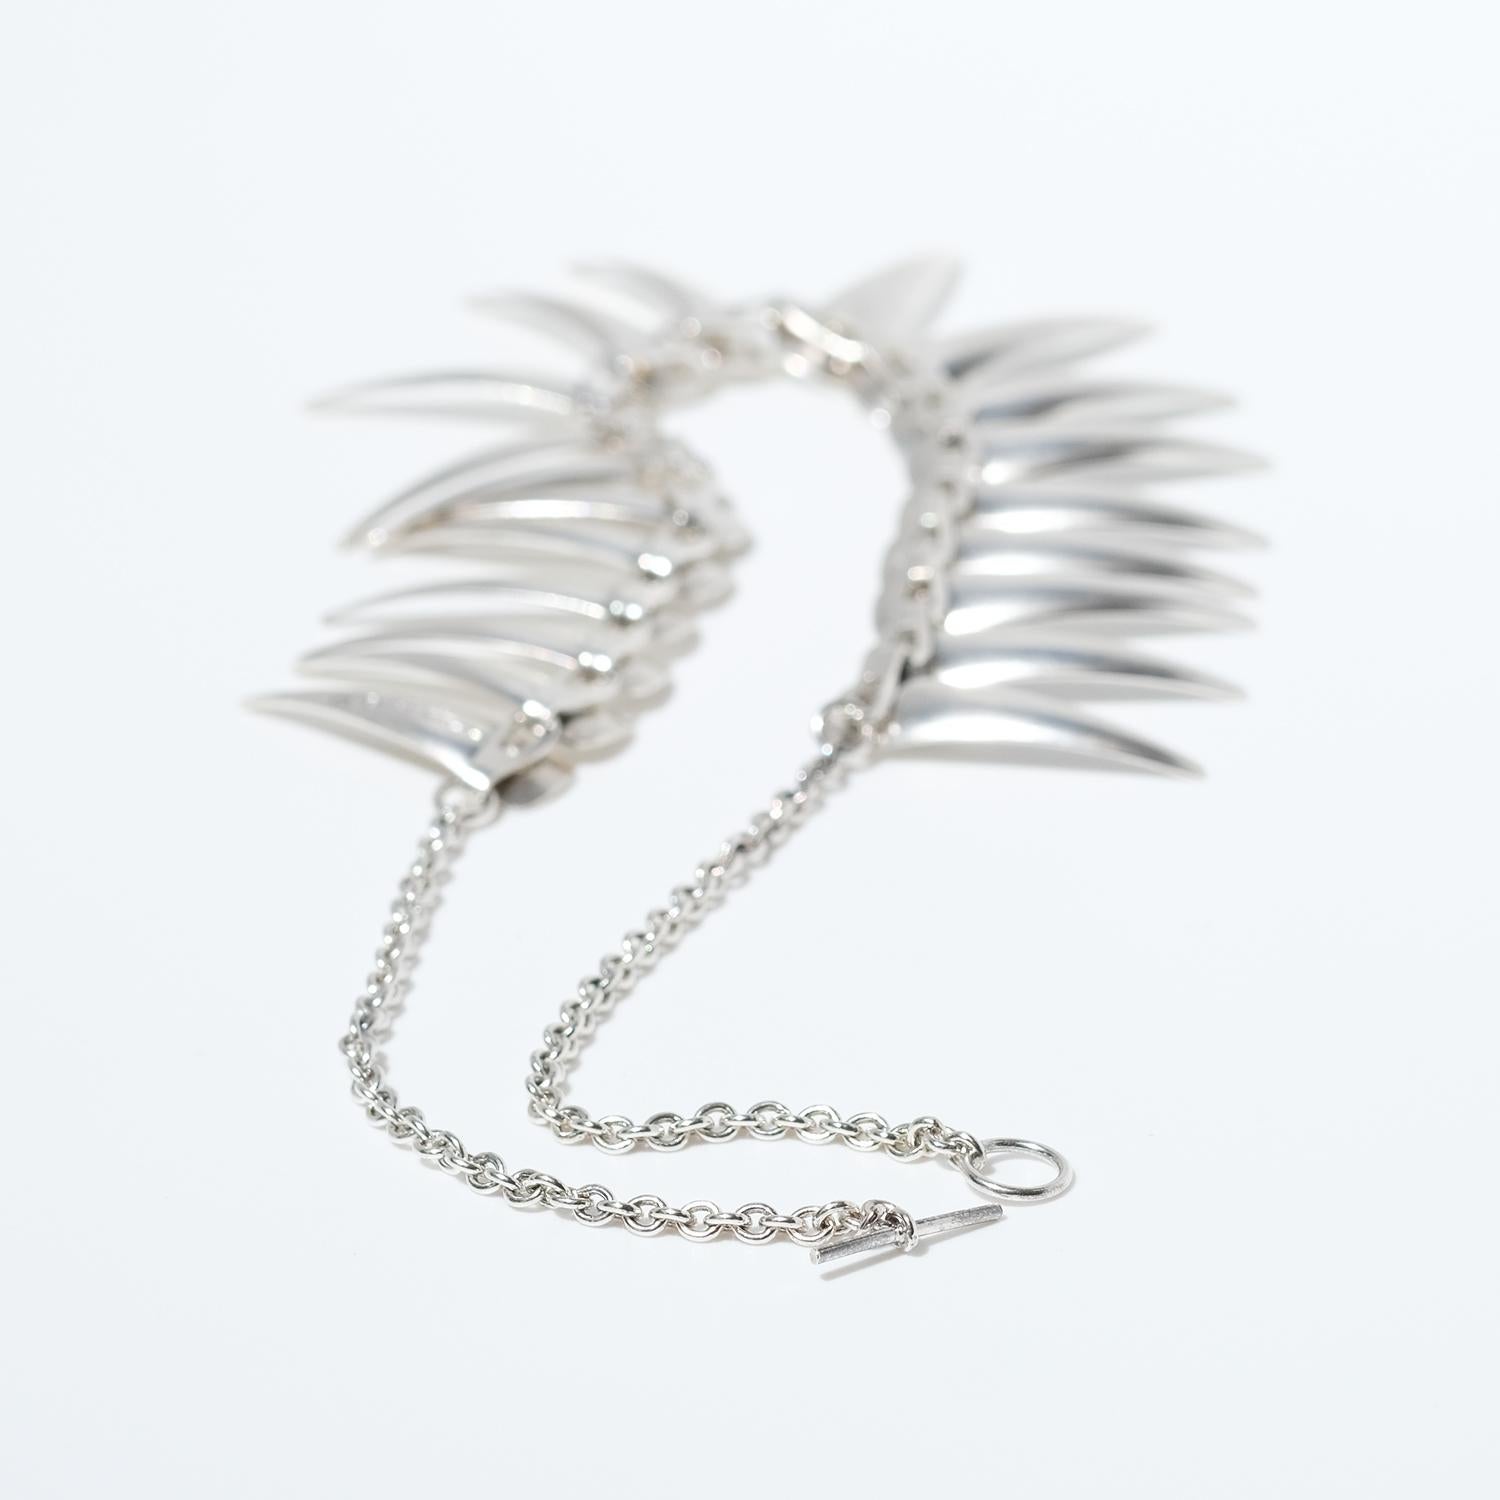 This sterling silver necklace is adorned with 20 slightly brushed silver pendants shaped as shark teeth. It closes easily with a circle and a bar. The necklace is a so called choker, meaning a necklace with a very close fitting around the neck.

The